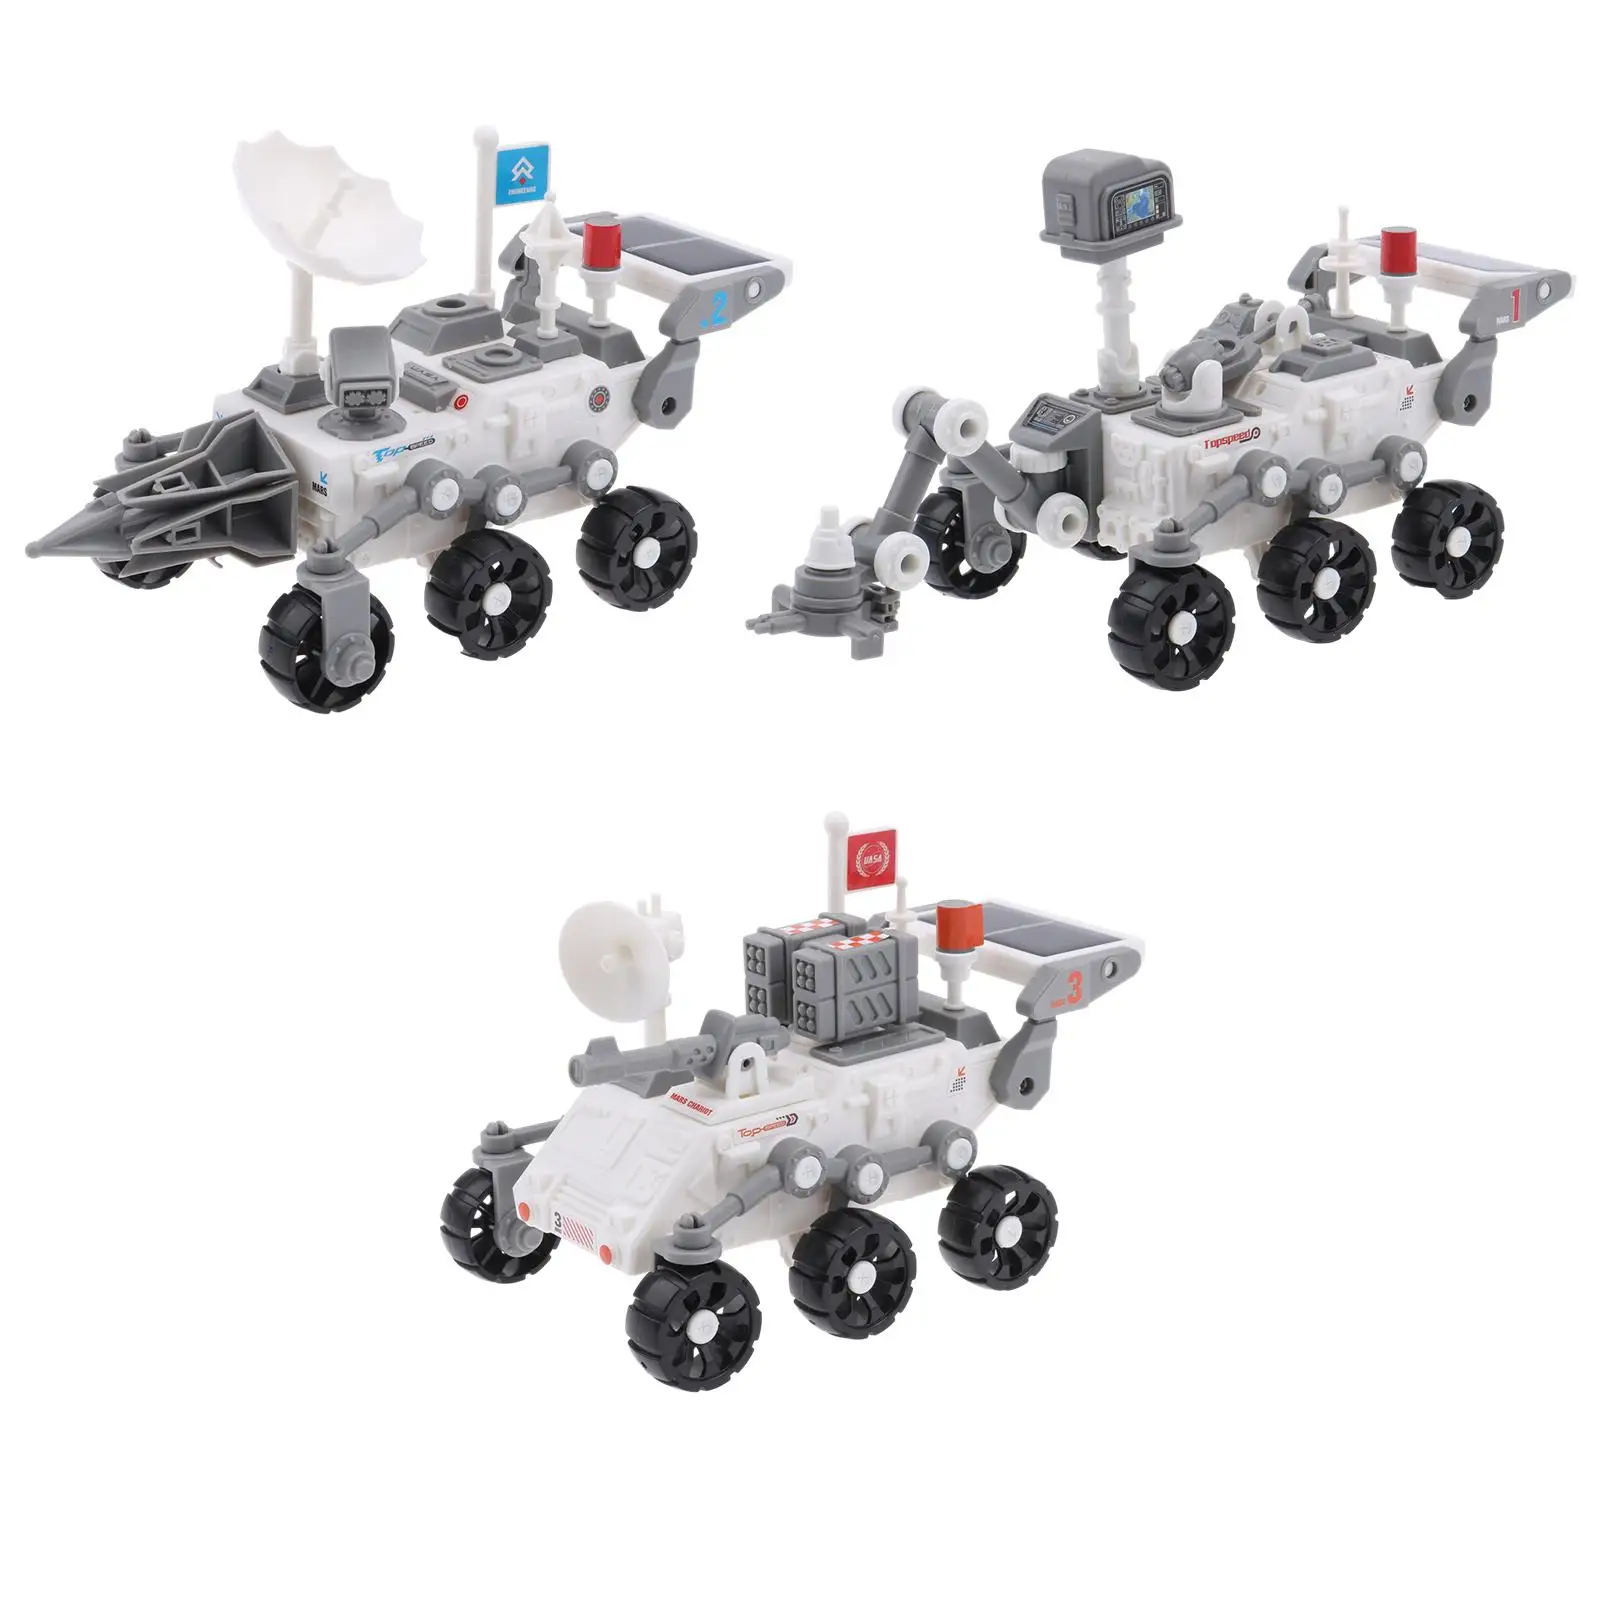 

3Pcs Solar Robot Toy Construction Engineering Set DIY Building Science Experiment Kits for Age 8-12 Boys Girls Birthday Gifts